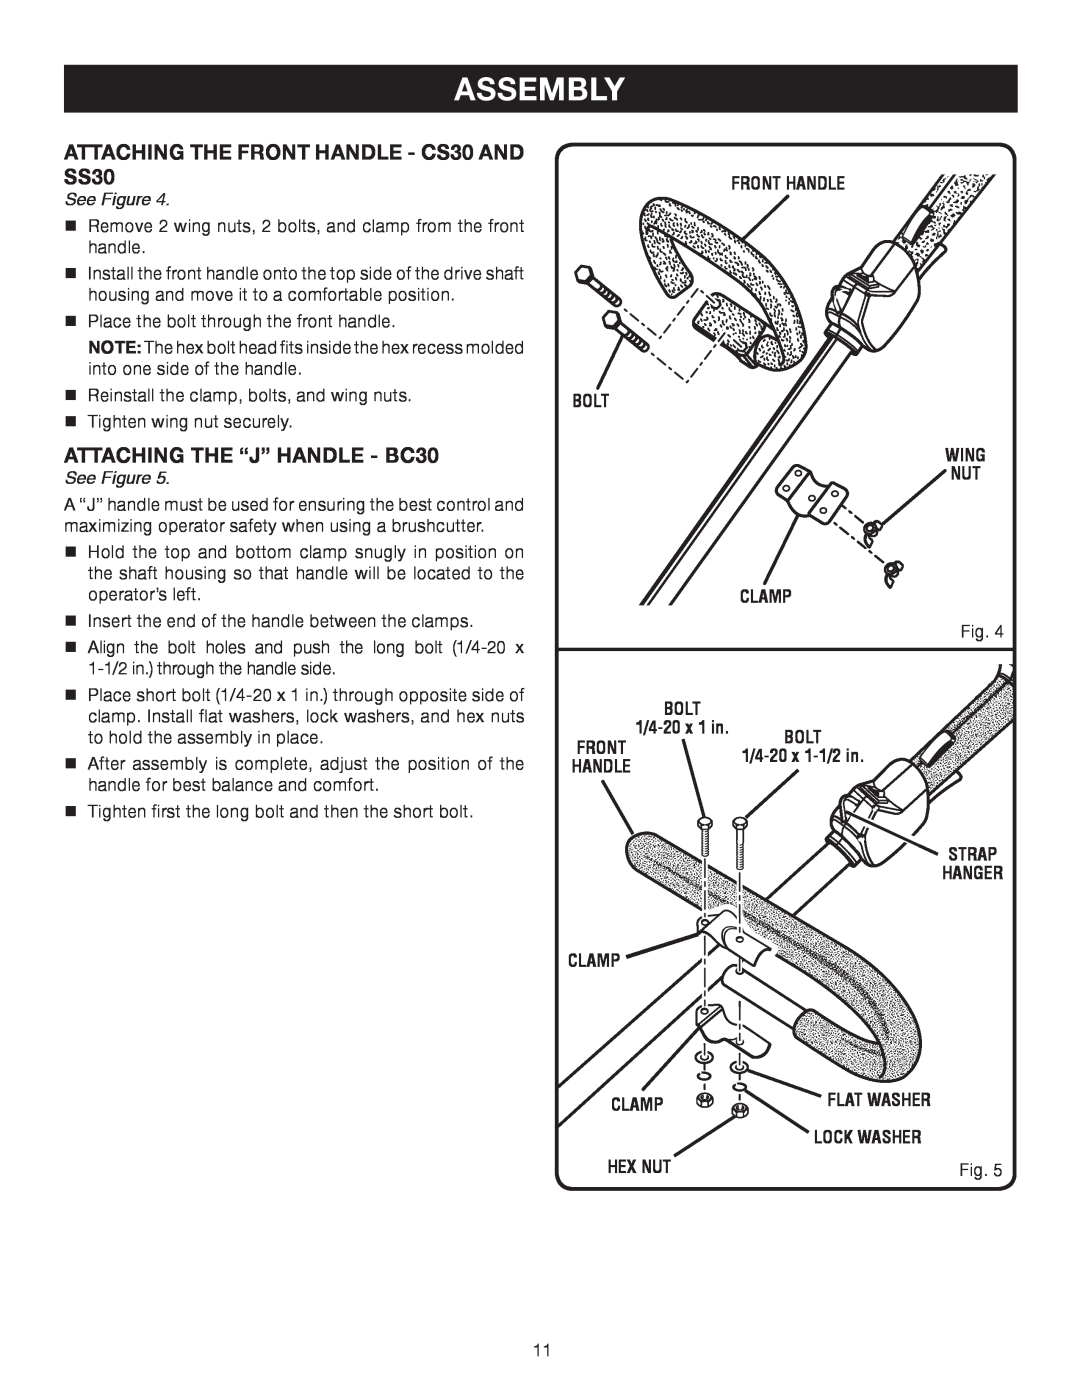 Ryobi RY30963 ATTACHING THE FRONT HANDLE - CS30 AND SS30, ATTACHING THE “J” HANDLE - BC30, Assembly, See Figure, Wing 